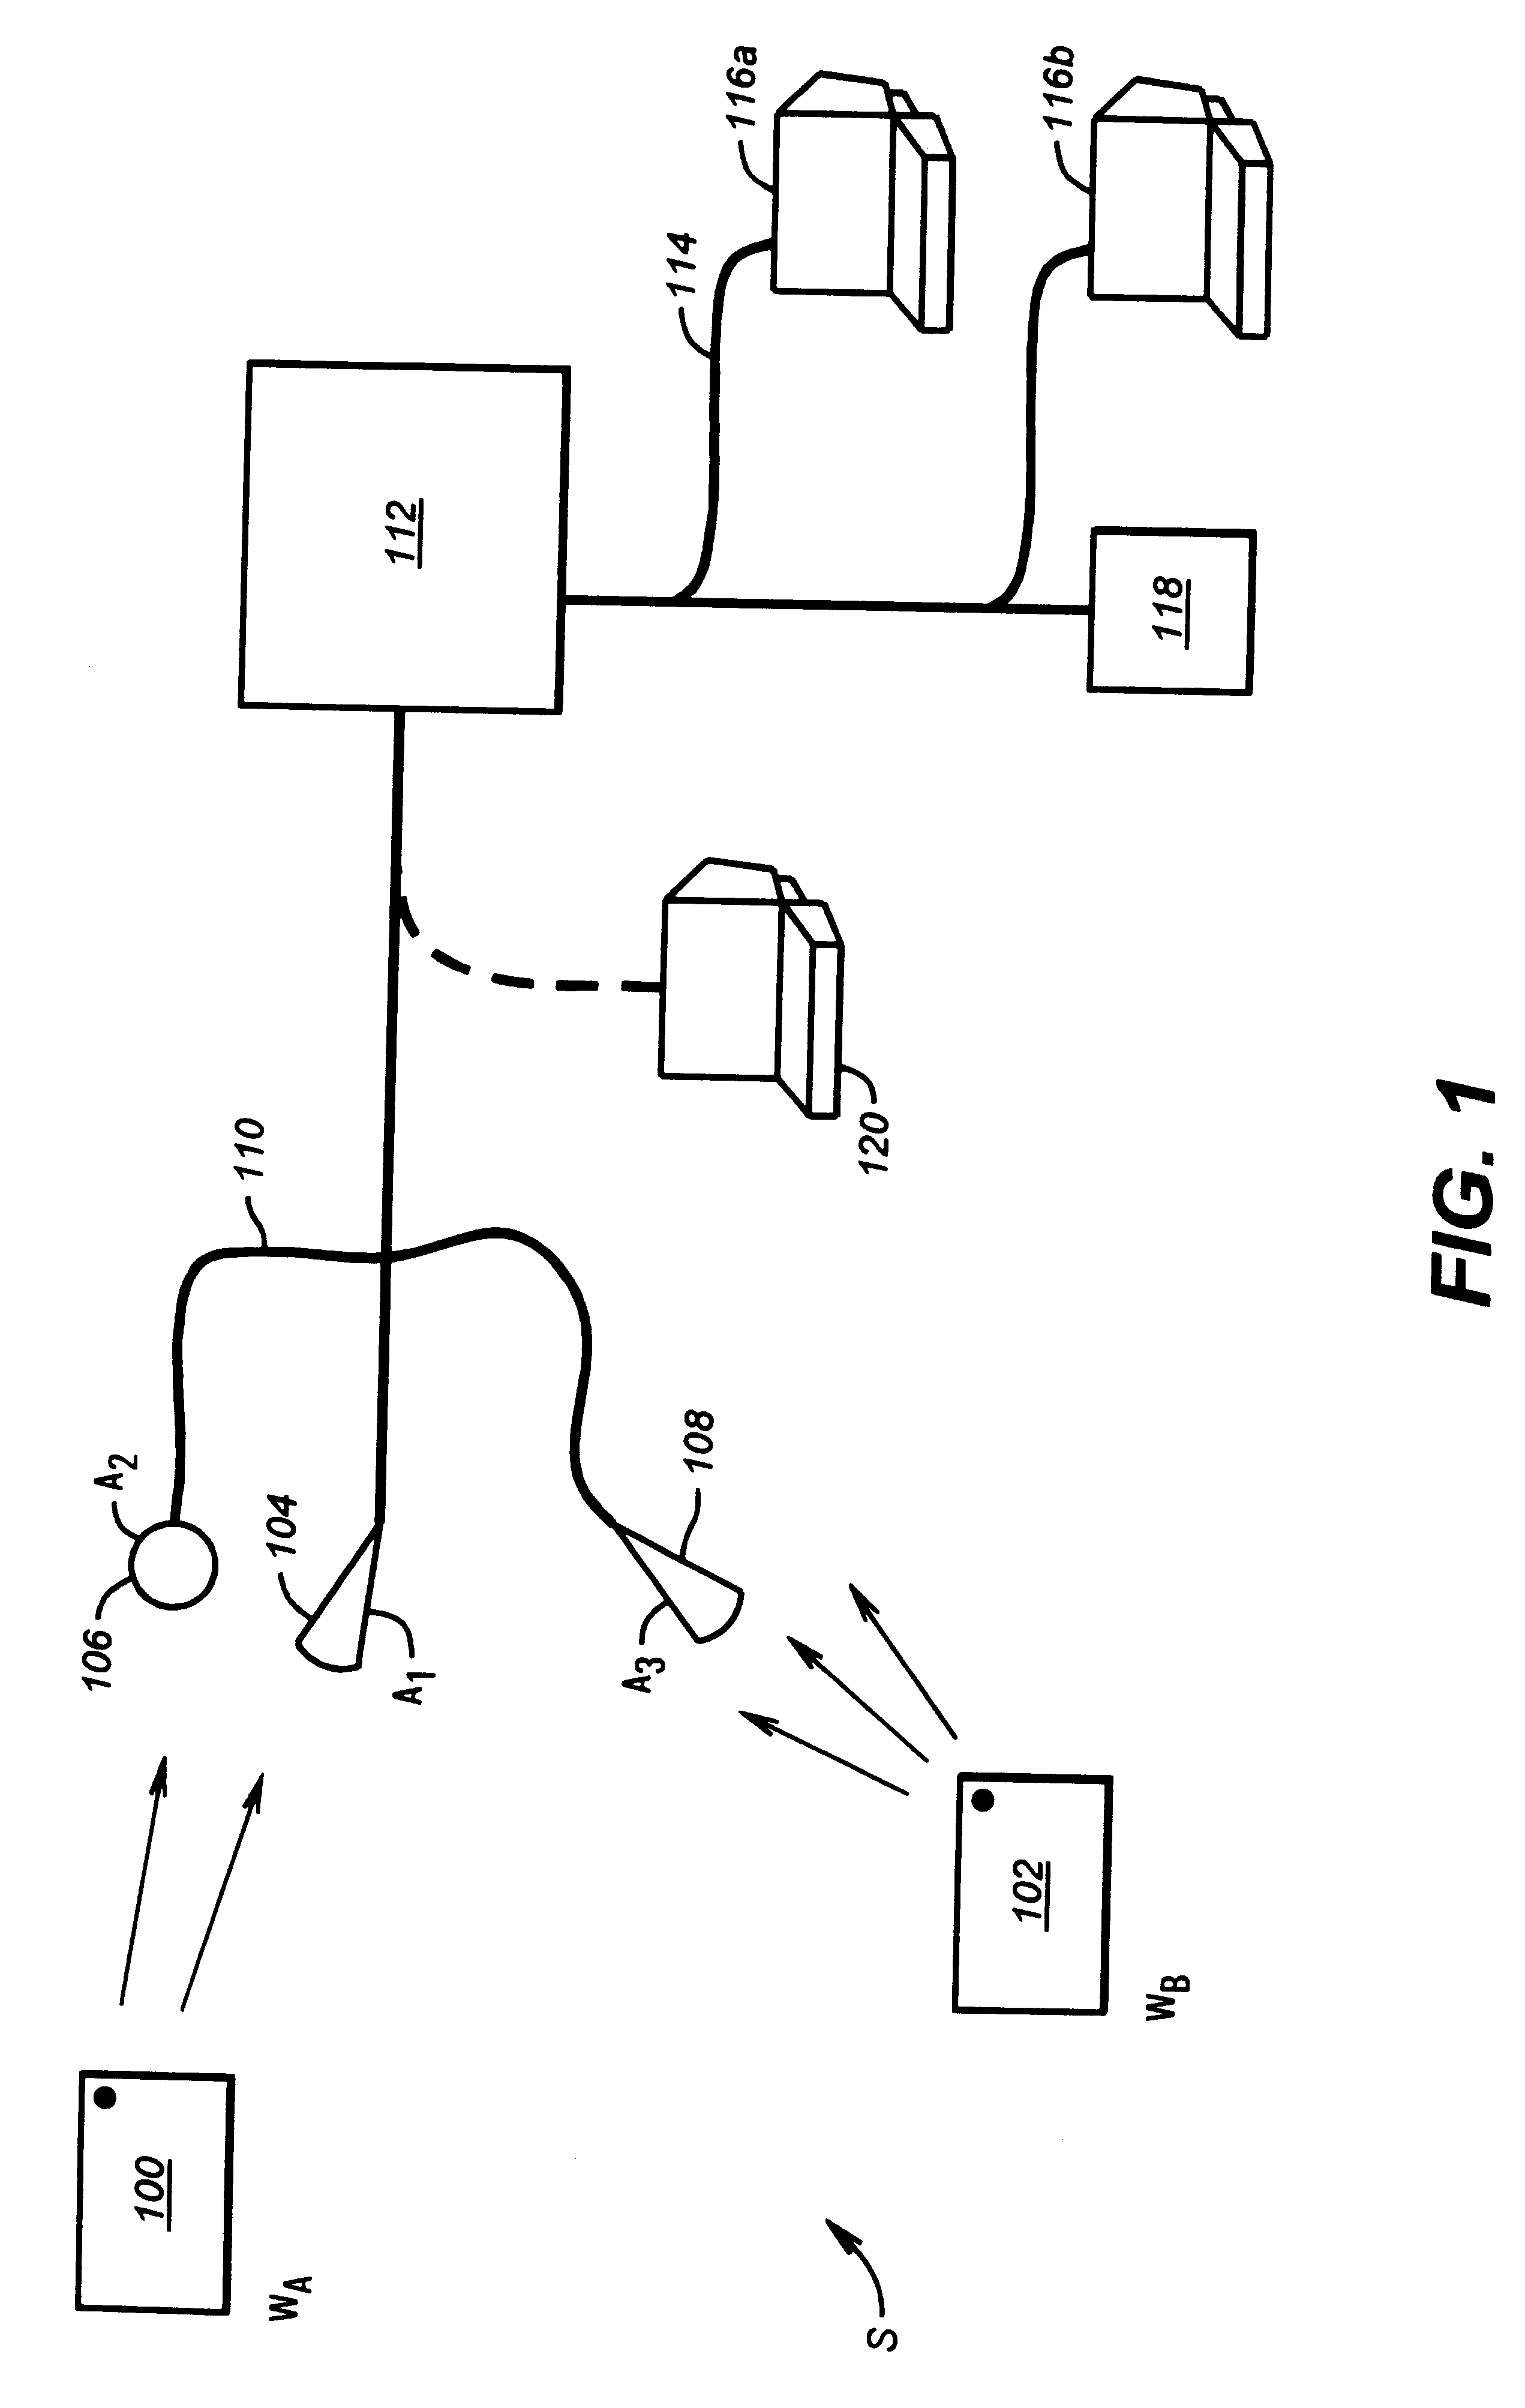 Location, identification and telemetry system using strobed signals at predetermined intervals